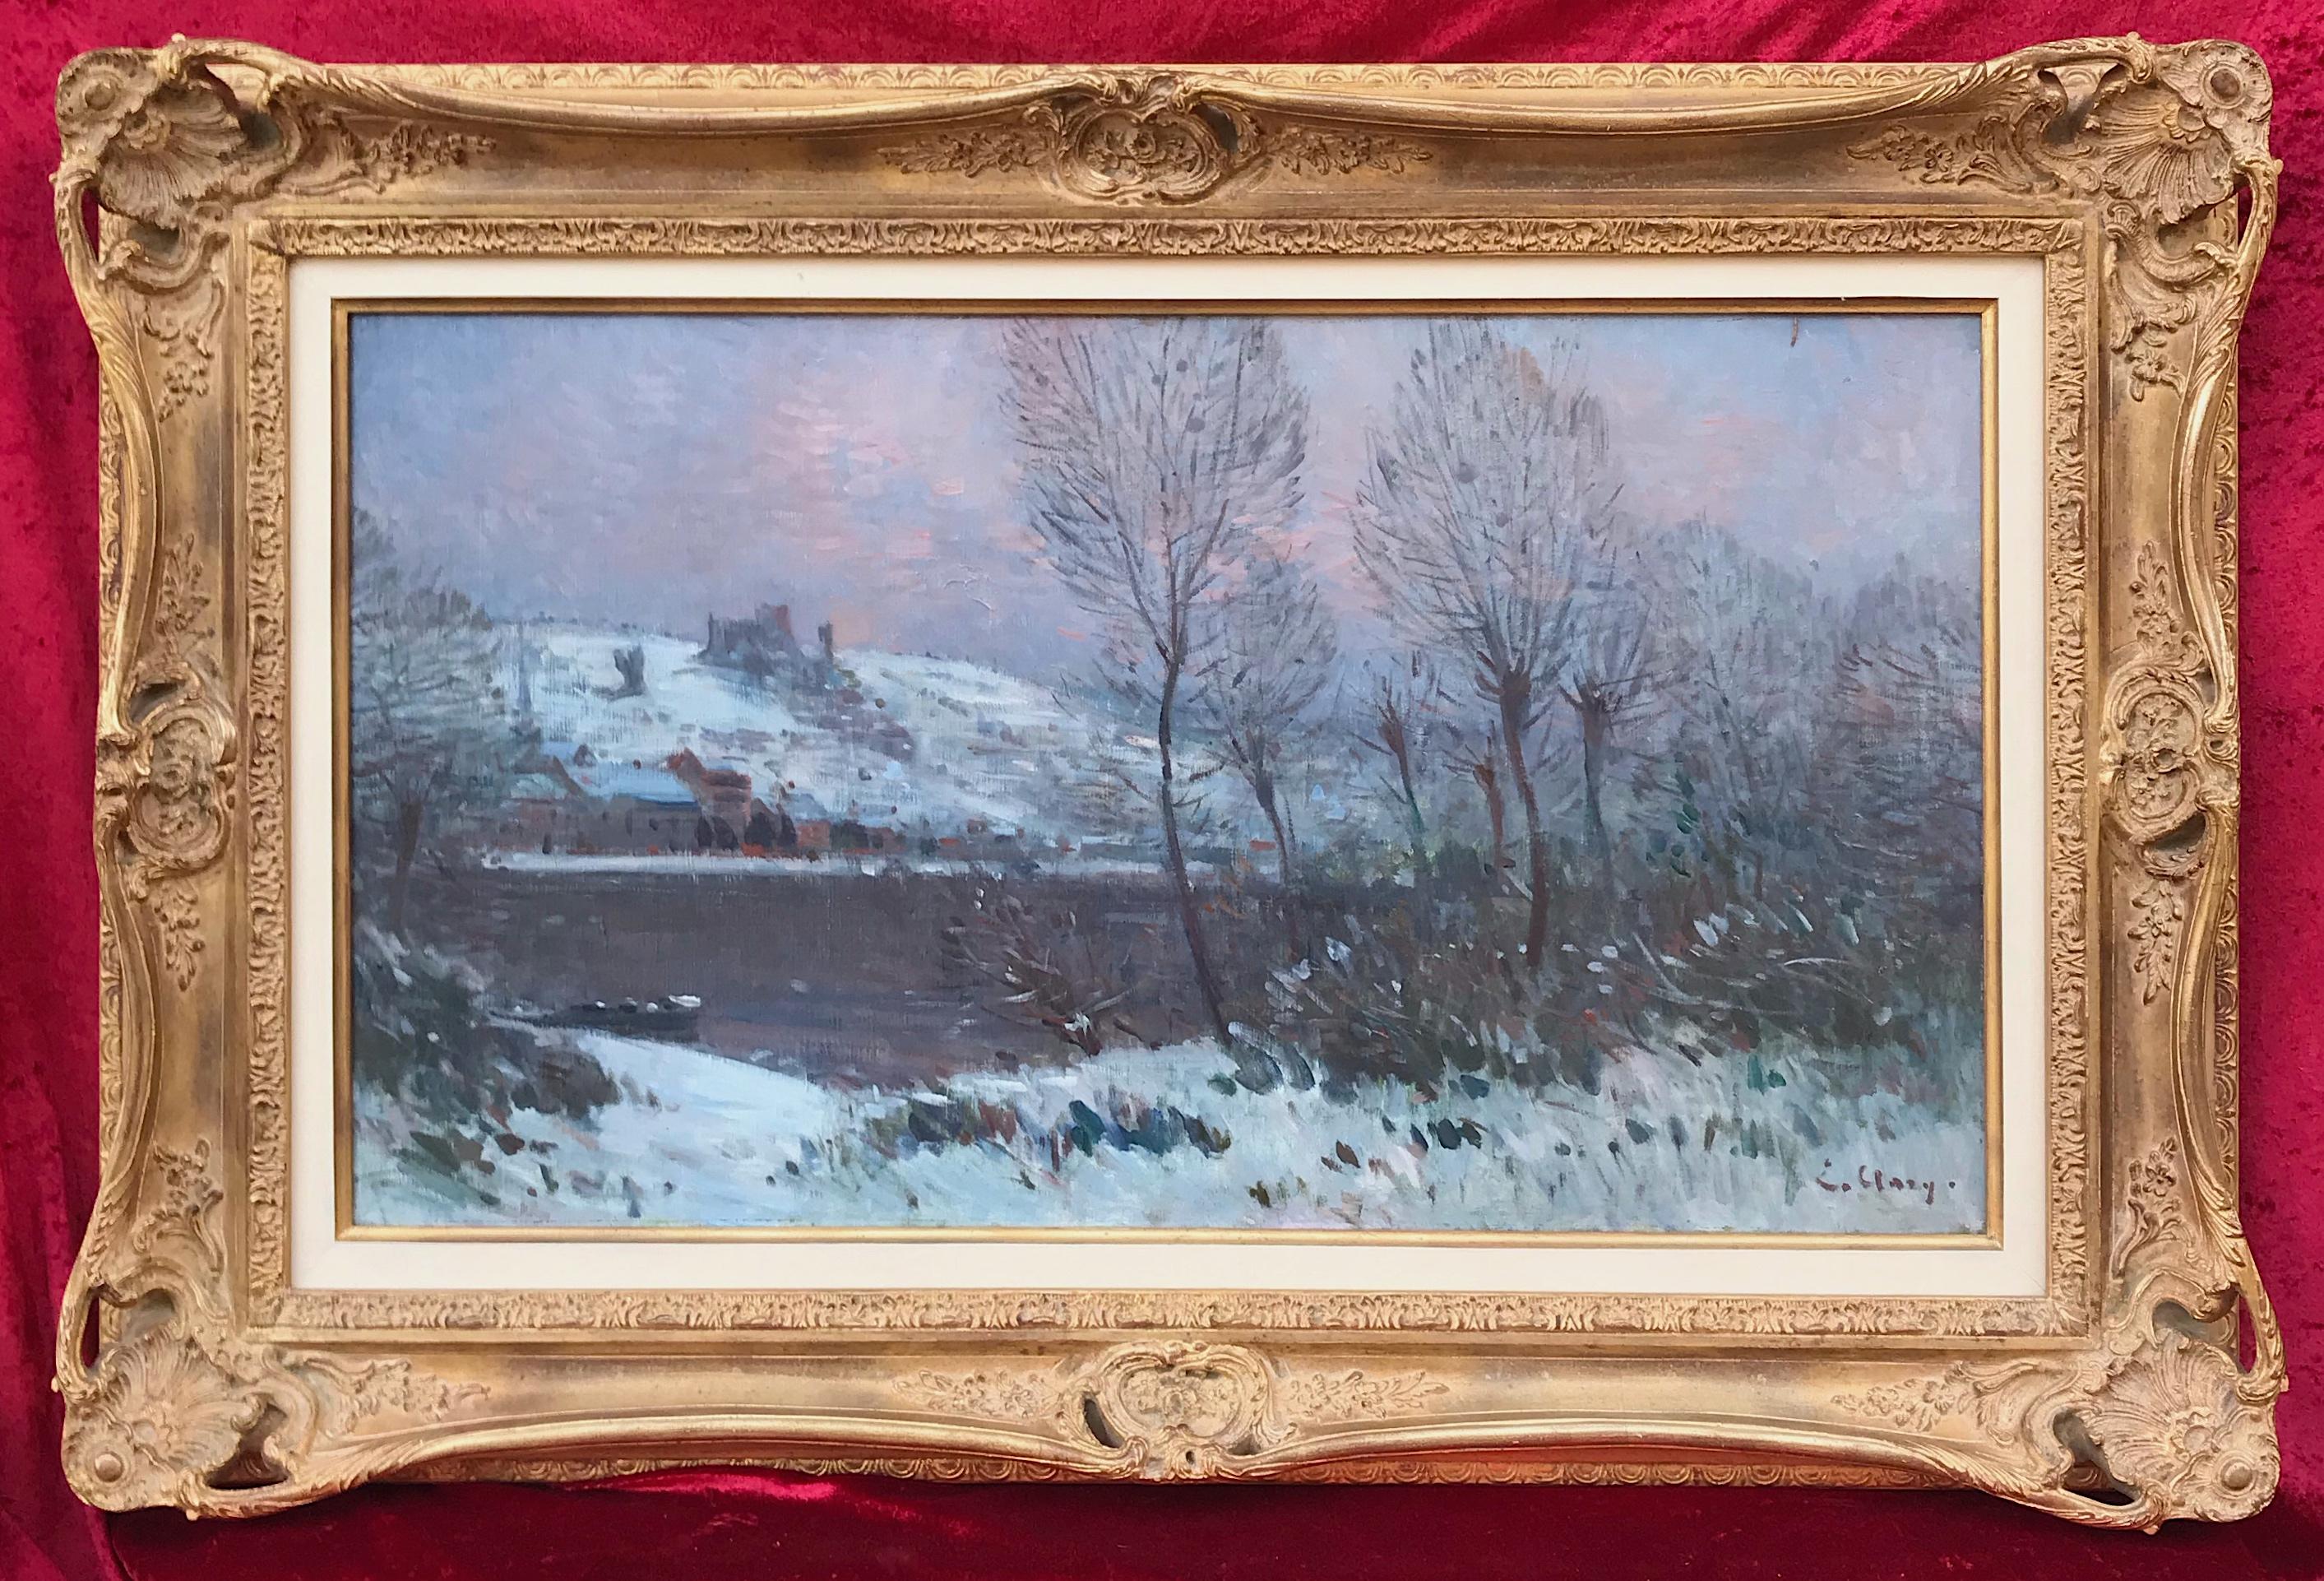 Winter Landscape by the River